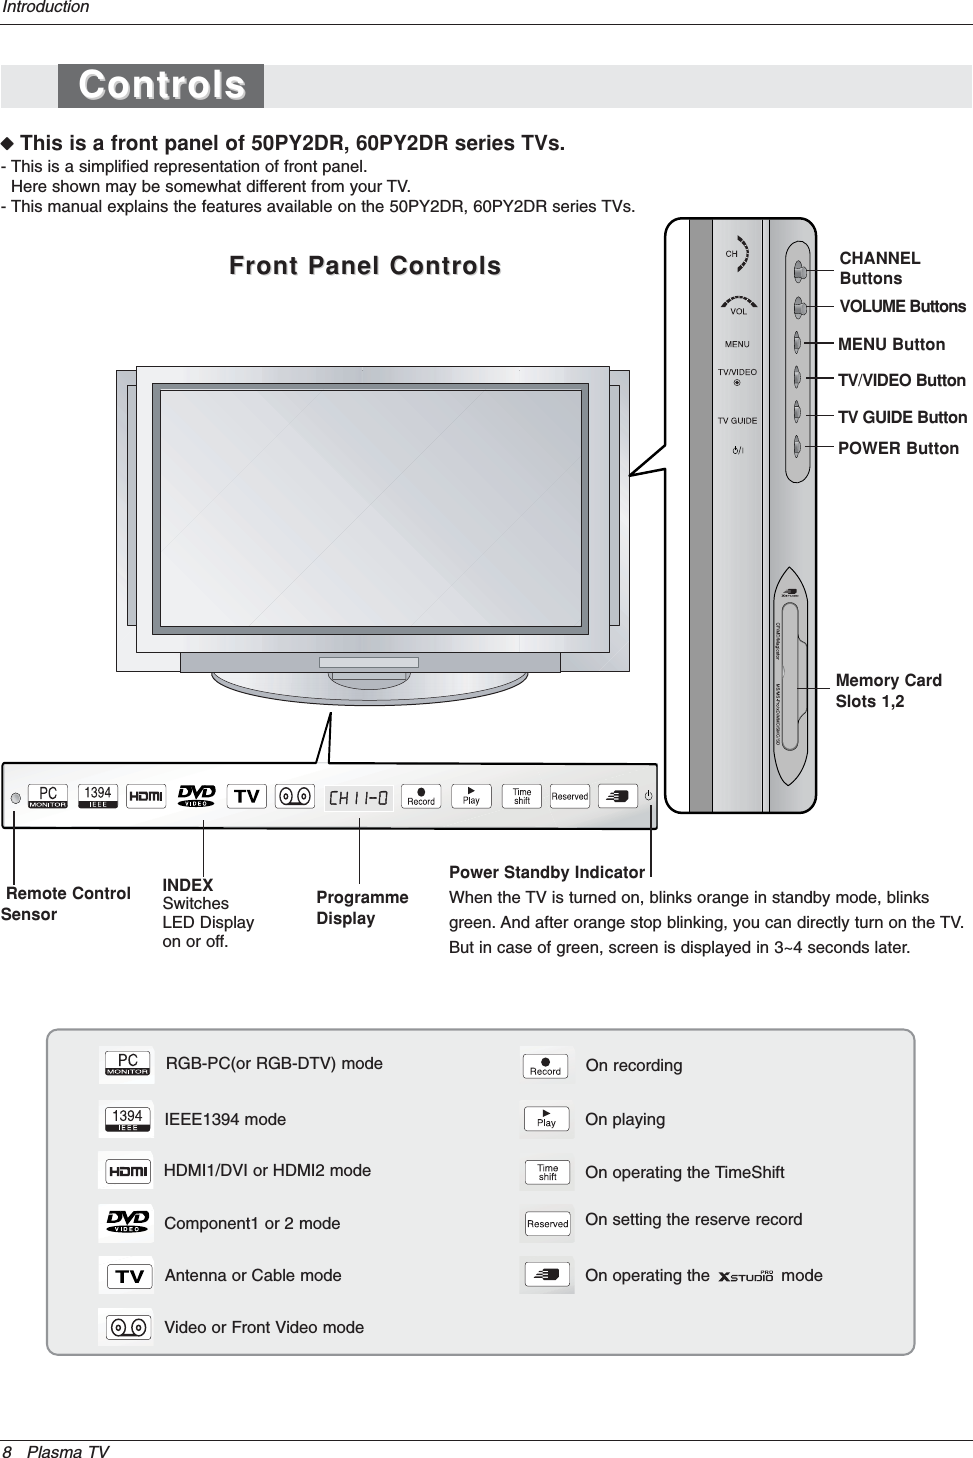 8 Plasma TVIntroductionWWThis is a front panel of 50PY2DR, 60PY2DR series TVs.- This is a simplified representation of front panel. Here shown may be somewhat different from your TV.- This manual explains the features available on the 50PY2DR, 60PY2DR series TVs.Front Panel ControlsFront Panel ControlsMENU ButtonTV/VIDEO ButtonPOWER ButtonVOLUME ButtonsCHANNELButtonsINDEXSwitchesLED Displayon or off.TV GUIDE ButtonRemote ControlSensorPower Standby IndicatorWhen the TV is turned on, blinks orange in standby mode, blinksgreen. And after orange stop blinking, you can directly turn on the TV.But in case of green, screen is displayed in 3~4 seconds later.ControlsControlsMemory CardSlots 1,2ProgrammeDisplayRGB-PC(or RGB-DTV) modeIEEE1394 modeHDMI1/DVI or HDMI2 modeComponent1 or 2 modeAntenna or Cable modeVideo or Front Video modeOn recordingOn playingOn operating the TimeShiftOn setting the reserve recordOn operating the              mode